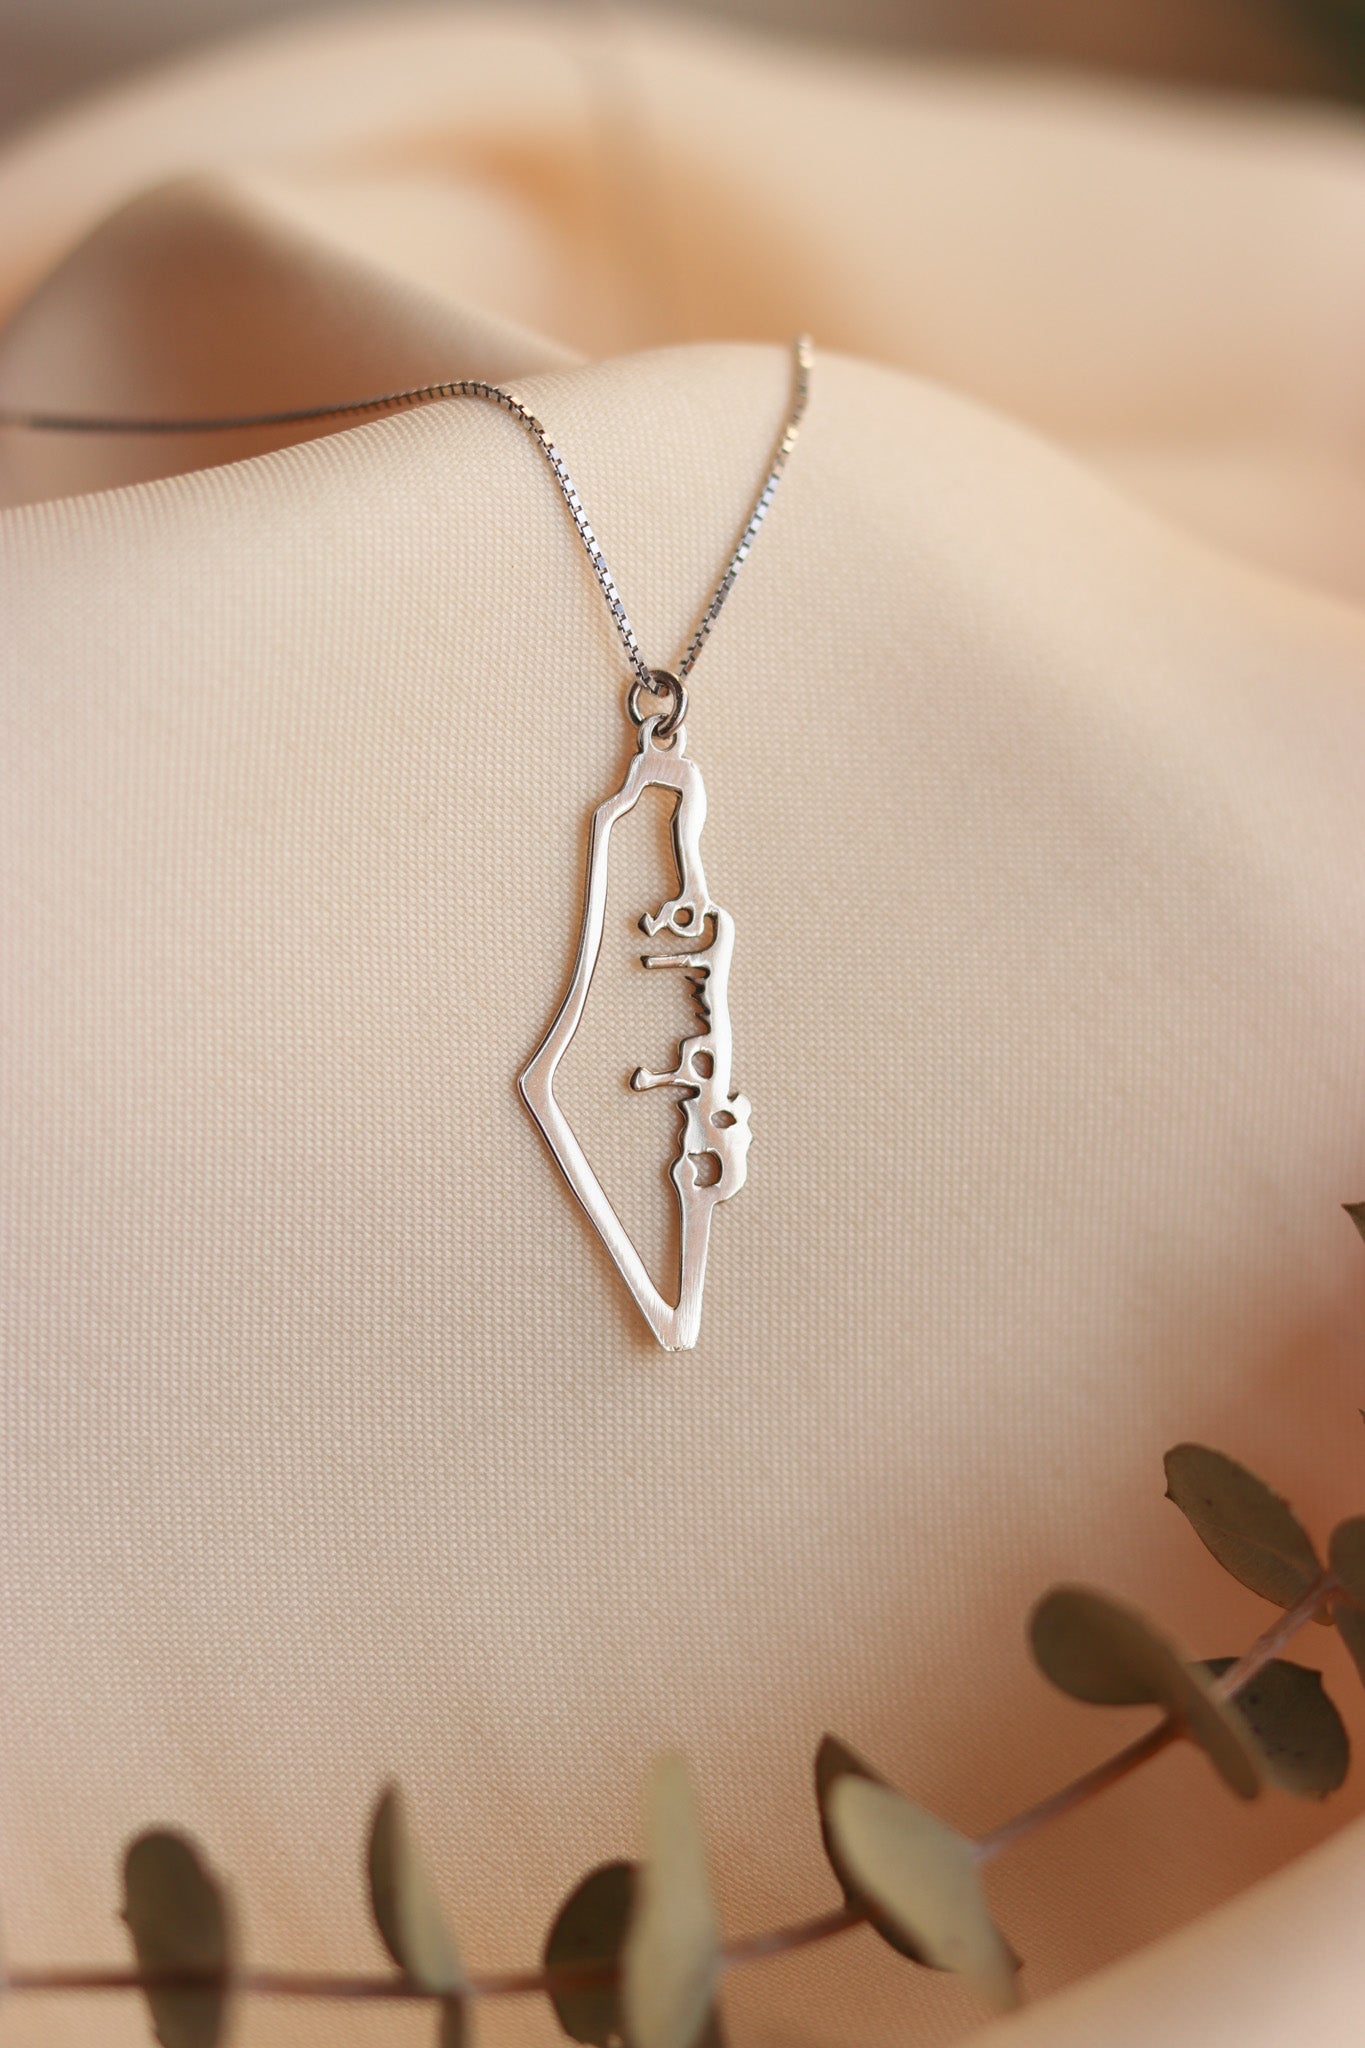 Palestine map with vertical Palestine Arabic word necklace